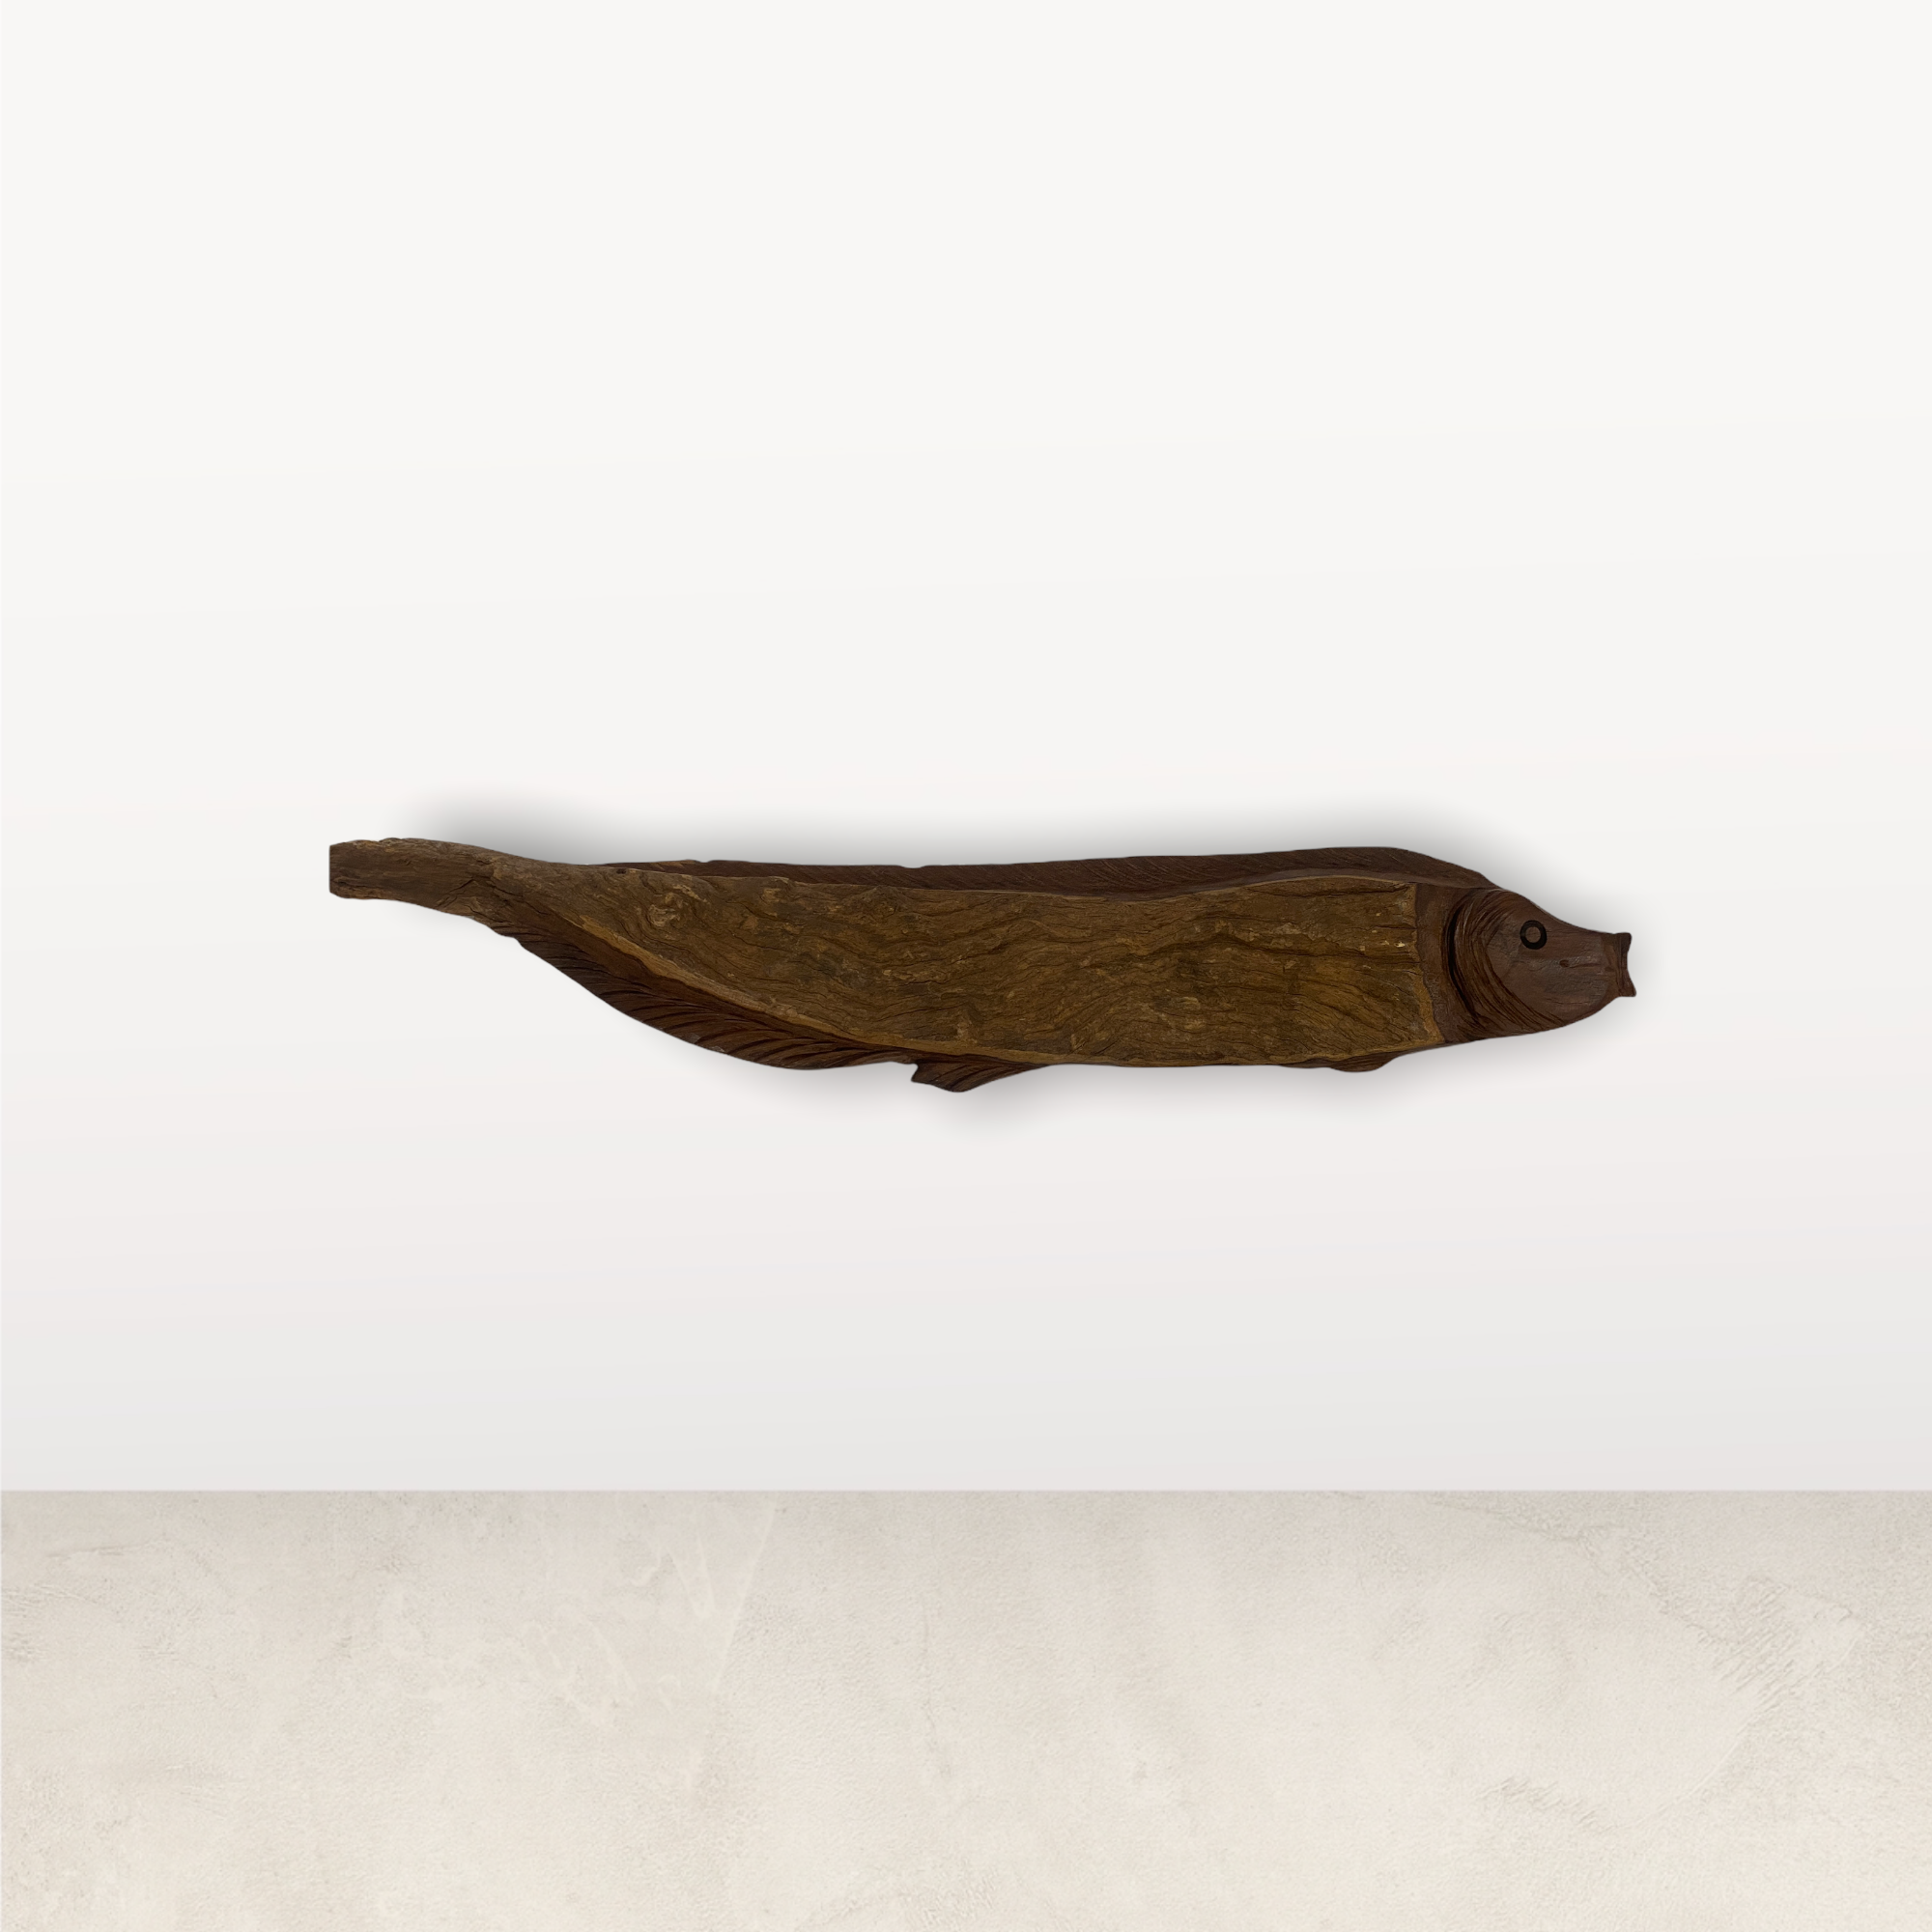 Driftwood Hand Carved Fish - (L11.9)